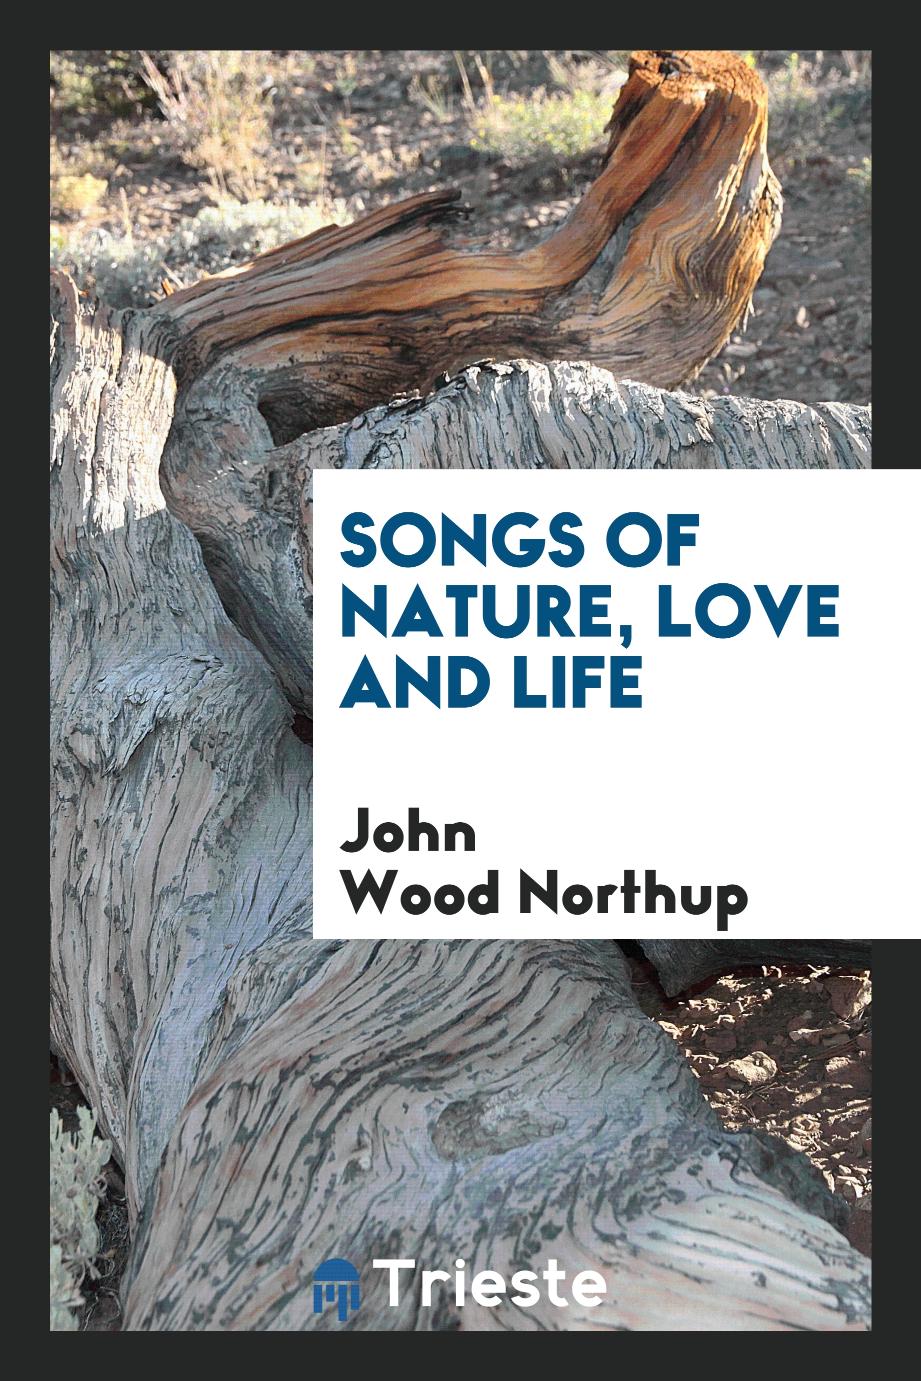 Songs of nature, love and life